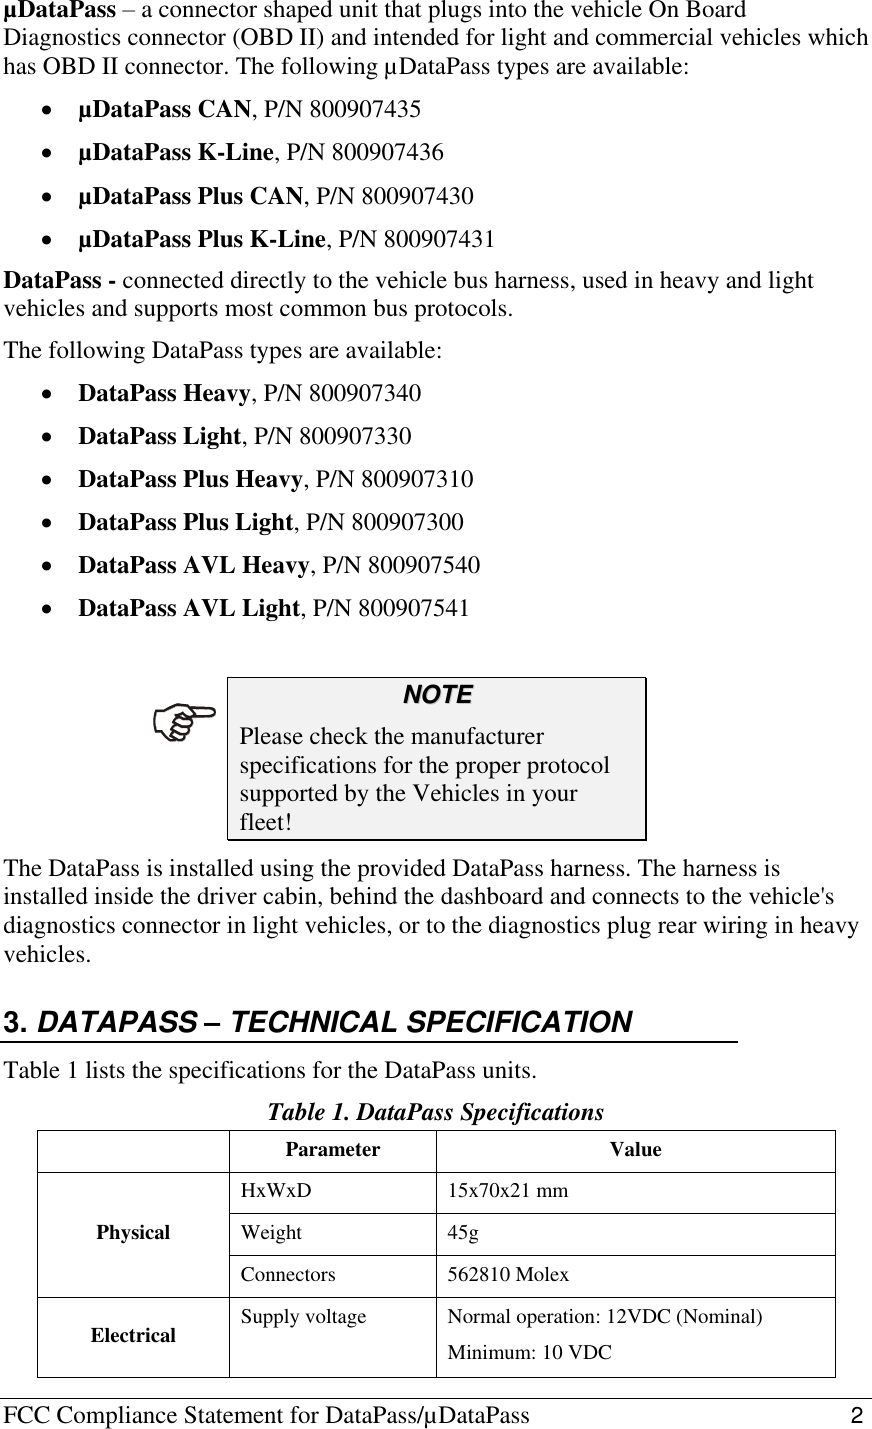 FCC Compliance Statement for DataPass/µDataPass                                                   2   µDataPass – a connector shaped unit that plugs into the vehicle On Board Diagnostics connector (OBD II) and intended for light and commercial vehicles which has OBD II connector. The following µDataPass types are available:  µDataPass CAN, P/N 800907435  µDataPass K-Line, P/N 800907436  µDataPass Plus CAN, P/N 800907430  µDataPass Plus K-Line, P/N 800907431 DataPass - connected directly to the vehicle bus harness, used in heavy and light vehicles and supports most common bus protocols. The following DataPass types are available:  DataPass Heavy, P/N 800907340  DataPass Light, P/N 800907330  DataPass Plus Heavy, P/N 800907310  DataPass Plus Light, P/N 800907300  DataPass AVL Heavy, P/N 800907540  DataPass AVL Light, P/N 800907541  NNOOTTEE  Please check the manufacturer specifications for the proper protocol supported by the Vehicles in your fleet! The DataPass is installed using the provided DataPass harness. The harness is installed inside the driver cabin, behind the dashboard and connects to the vehicle&apos;s diagnostics connector in light vehicles, or to the diagnostics plug rear wiring in heavy vehicles. 3. DATAPASS – TECHNICAL SPECIFICATION Table 1 lists the specifications for the DataPass units. Table 1. DataPass Specifications  Parameter Value Physical HxWxD 15x70x21 mm Weight 45g Connectors 562810 Molex Electrical Supply voltage Normal operation: 12VDC (Nominal) Minimum: 10 VDC  